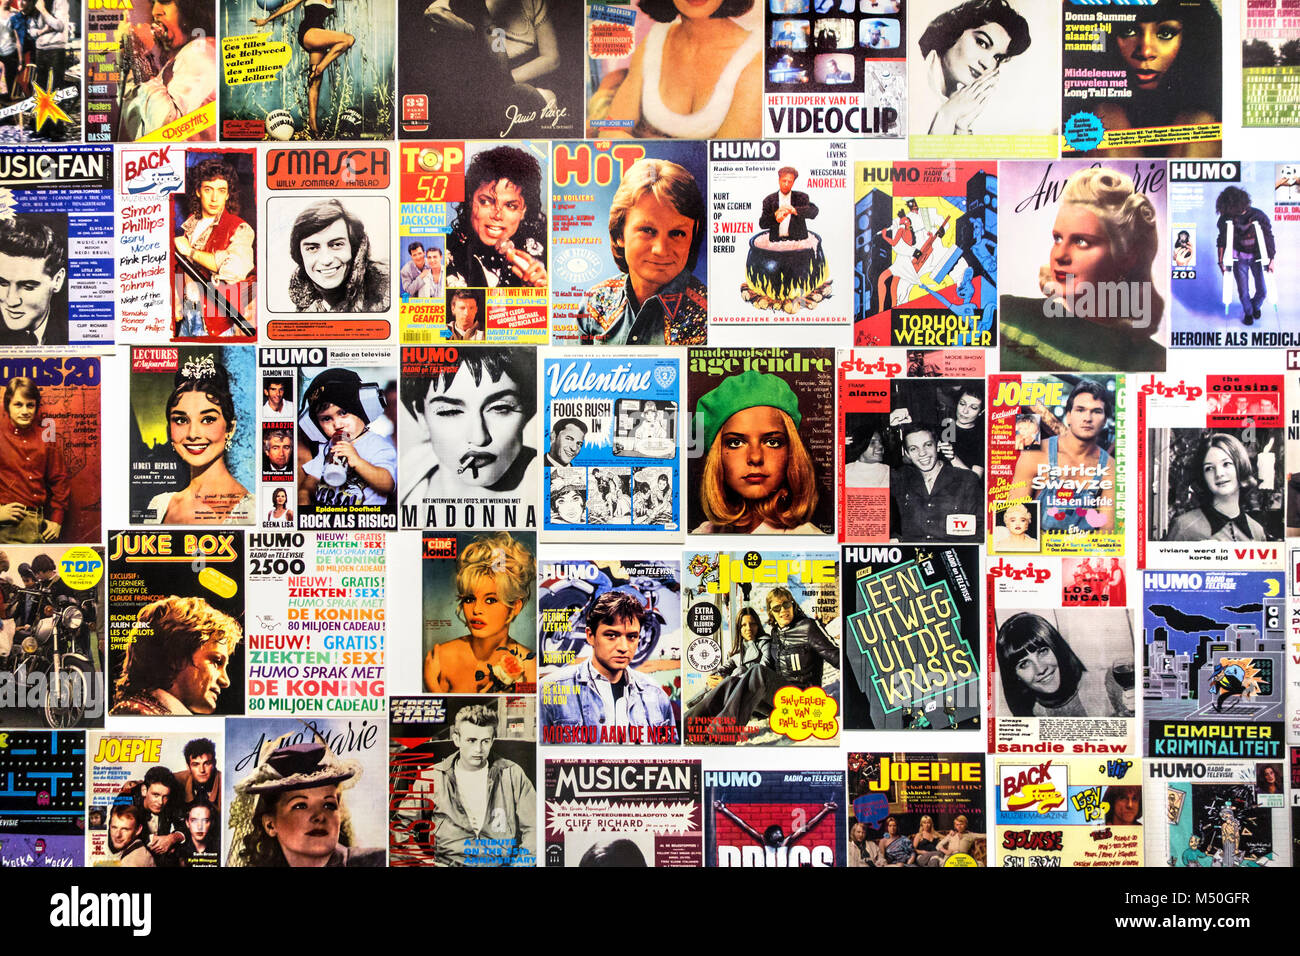 Collection of old covers of international music magazines / supermarket tabloids Stock Photo